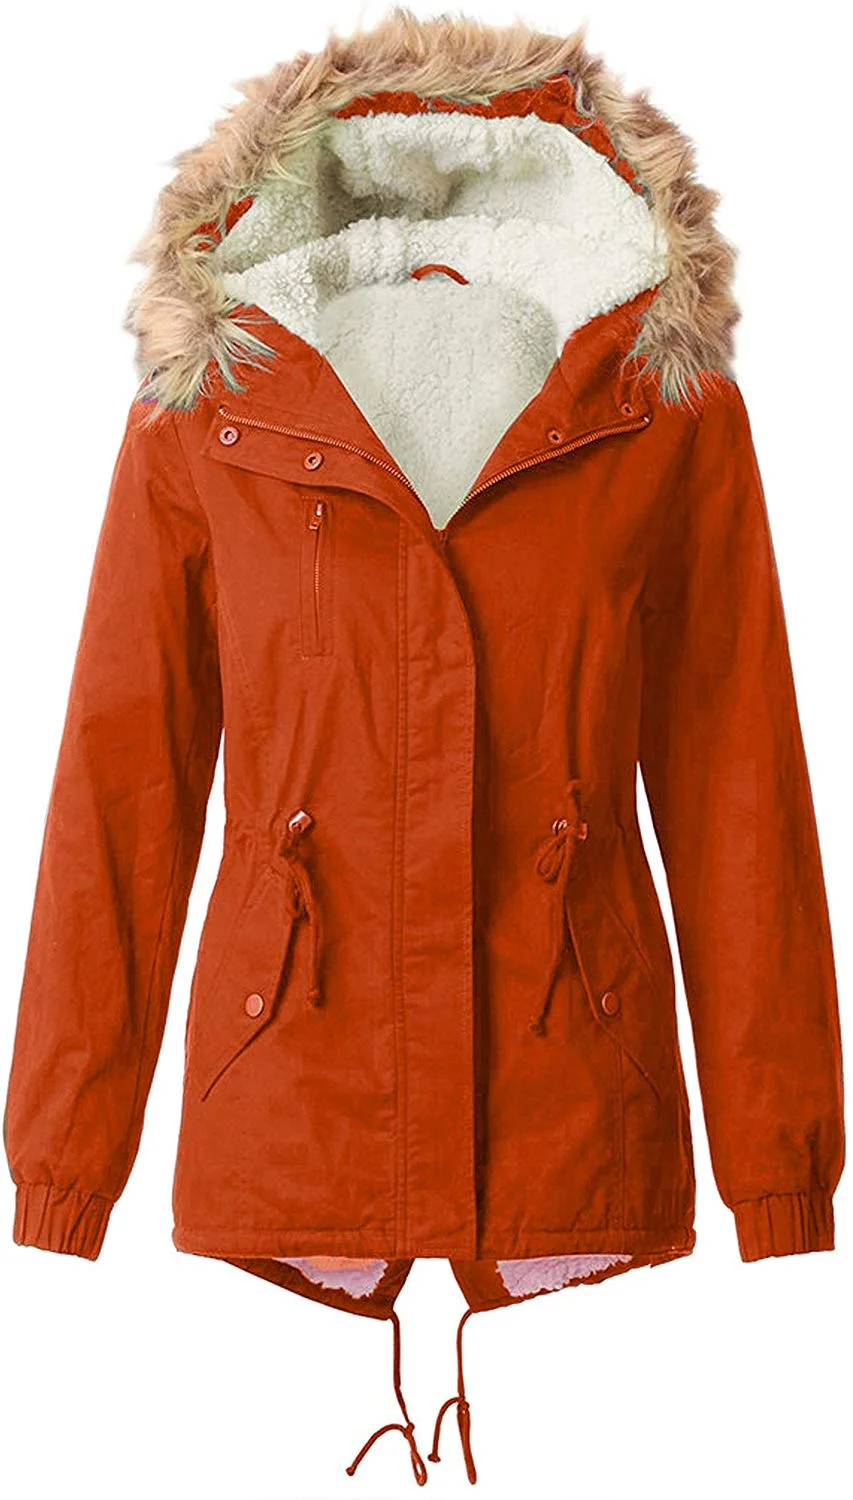 Women's Quilted or Inner Fur Lined Sherpa Anorak Down Parka Jacket